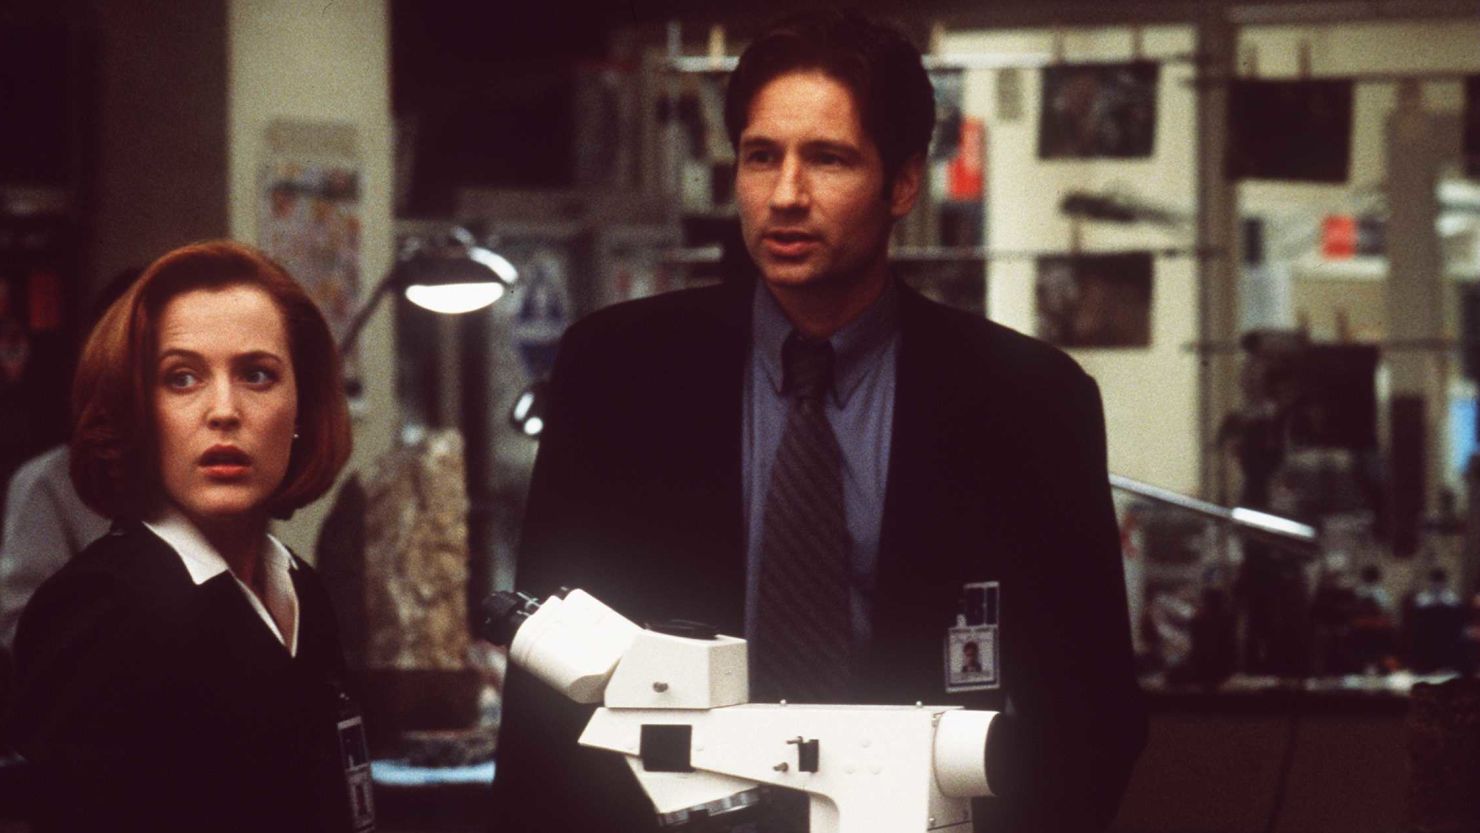 Gillian Anderson and David Duchovny could be bringing Scully and Mulder back to TV.